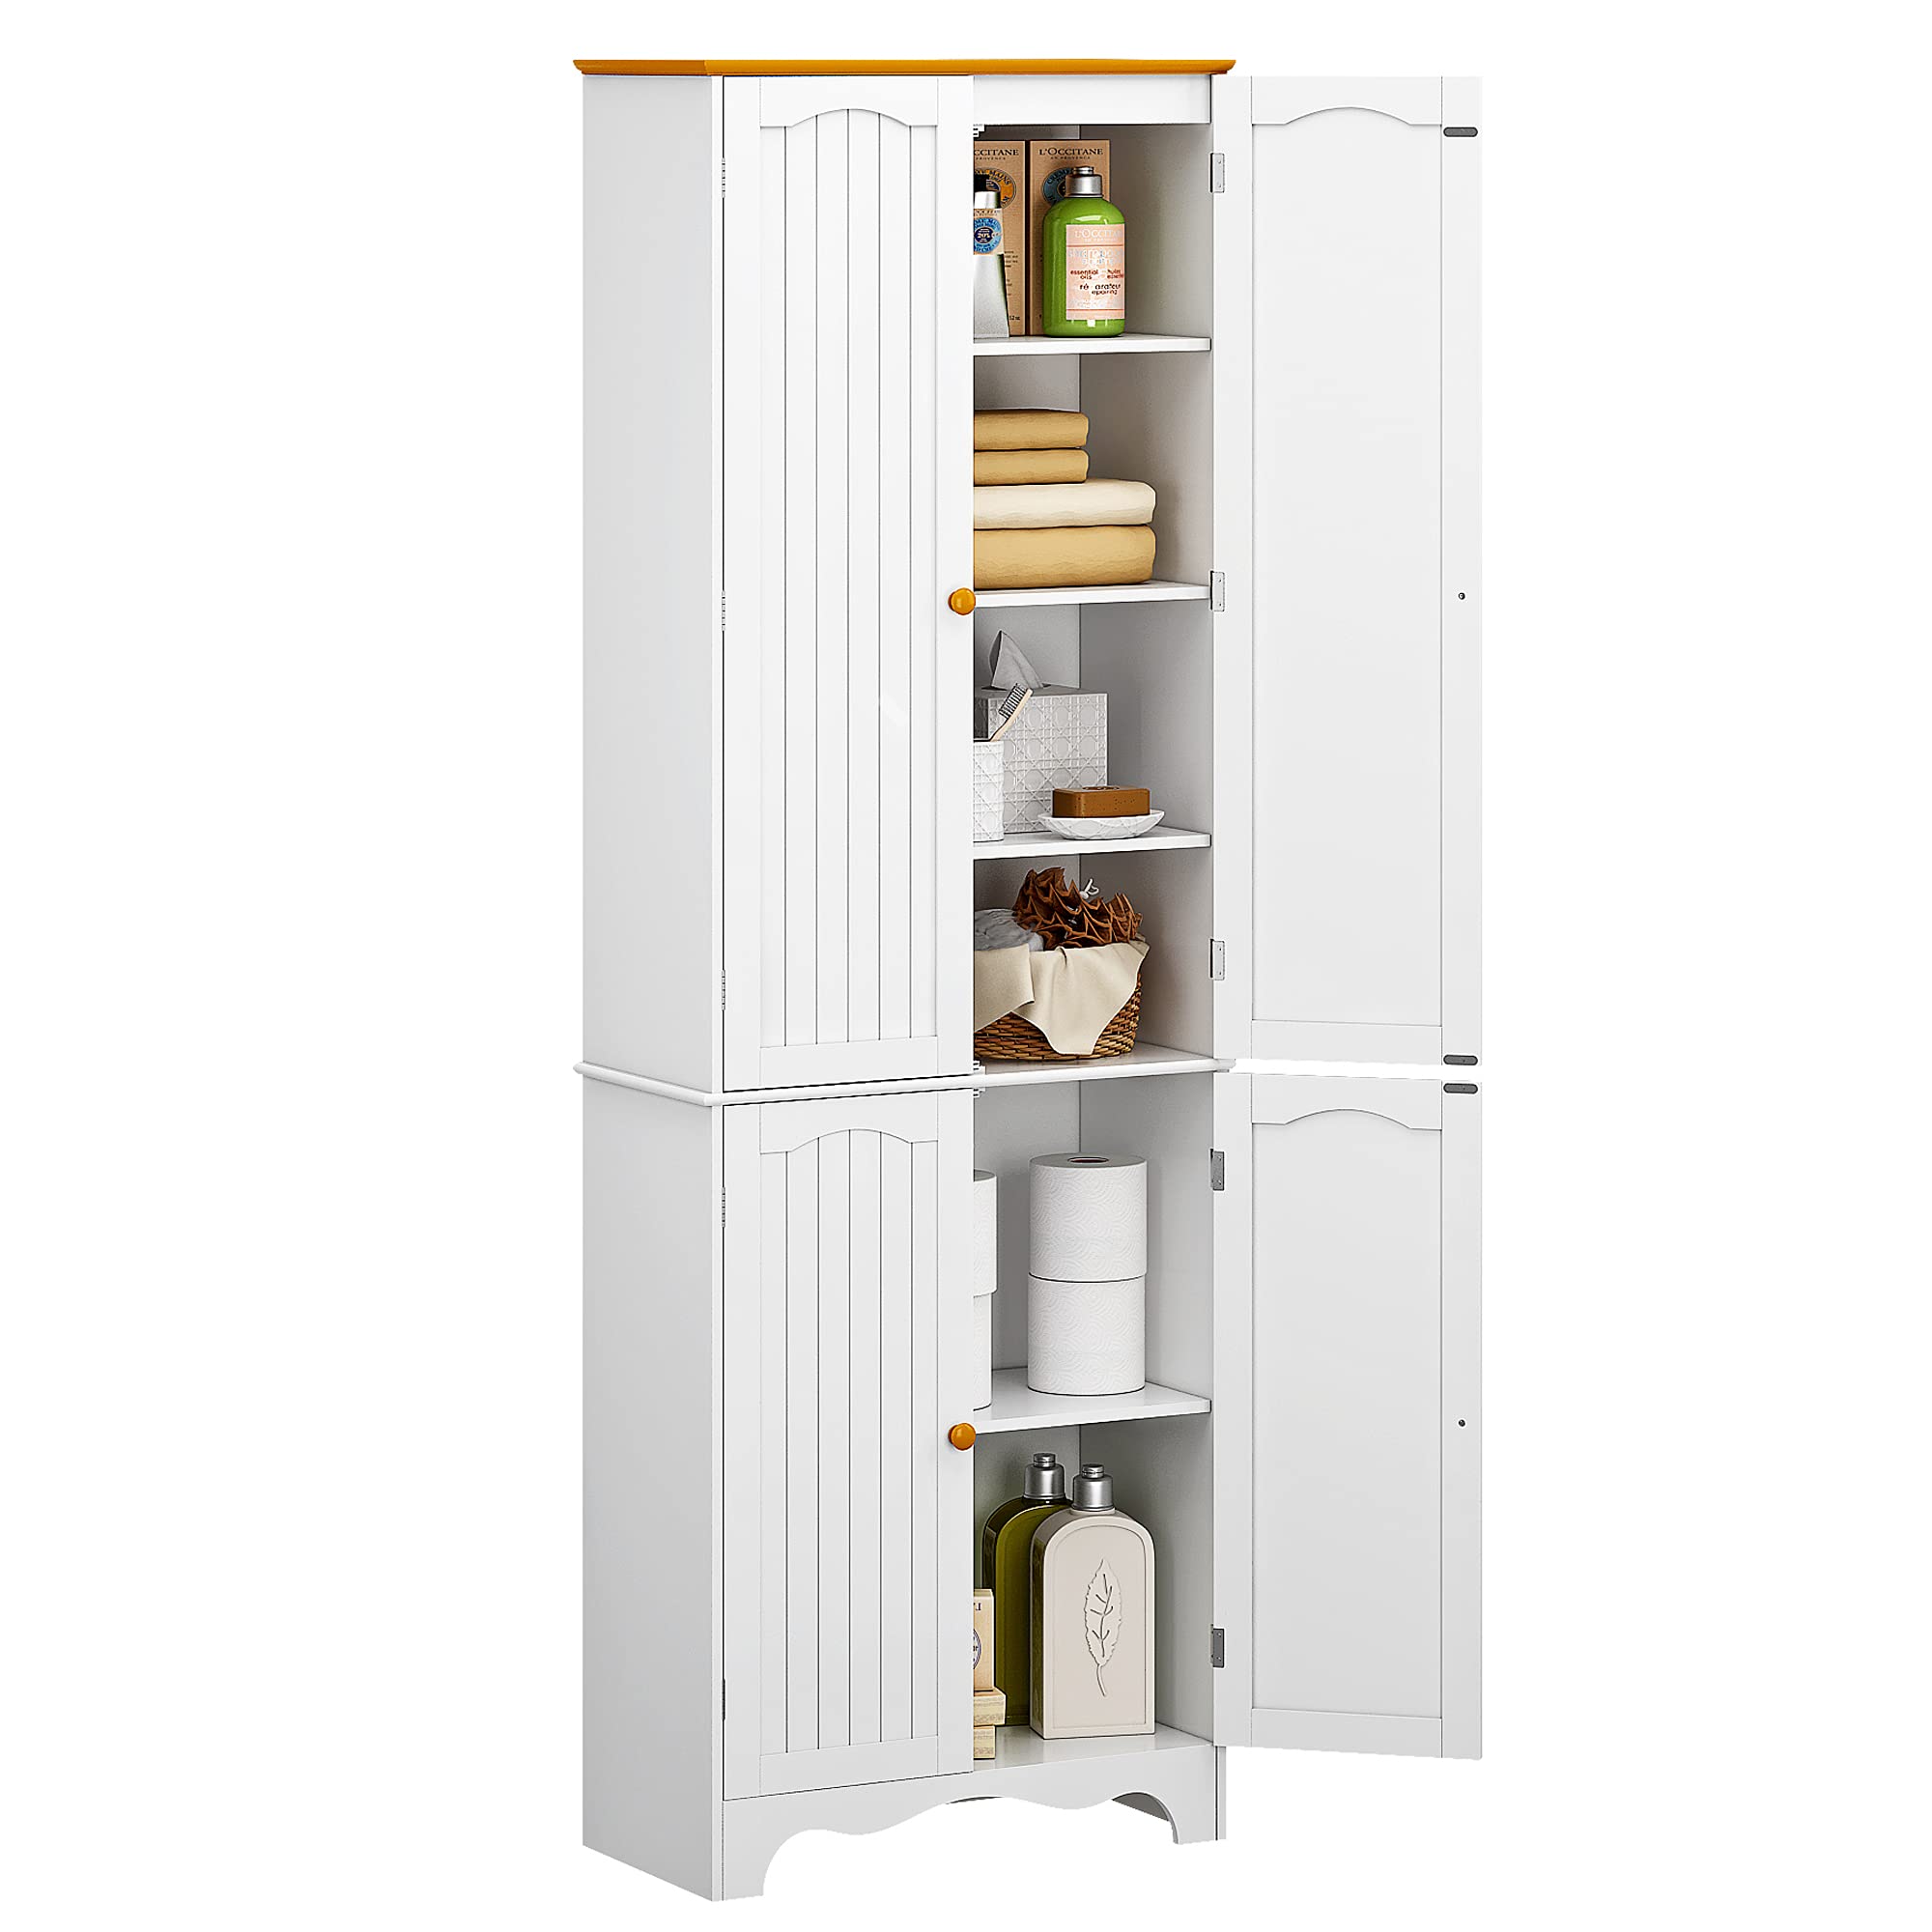 JEROAL 72''H Kitchen Pantry, Tall Pantry Cabinet, Dining Room Entryway Floor Cabinet with Doors, Adjustable Shelves and 2 Large Storage Cab...